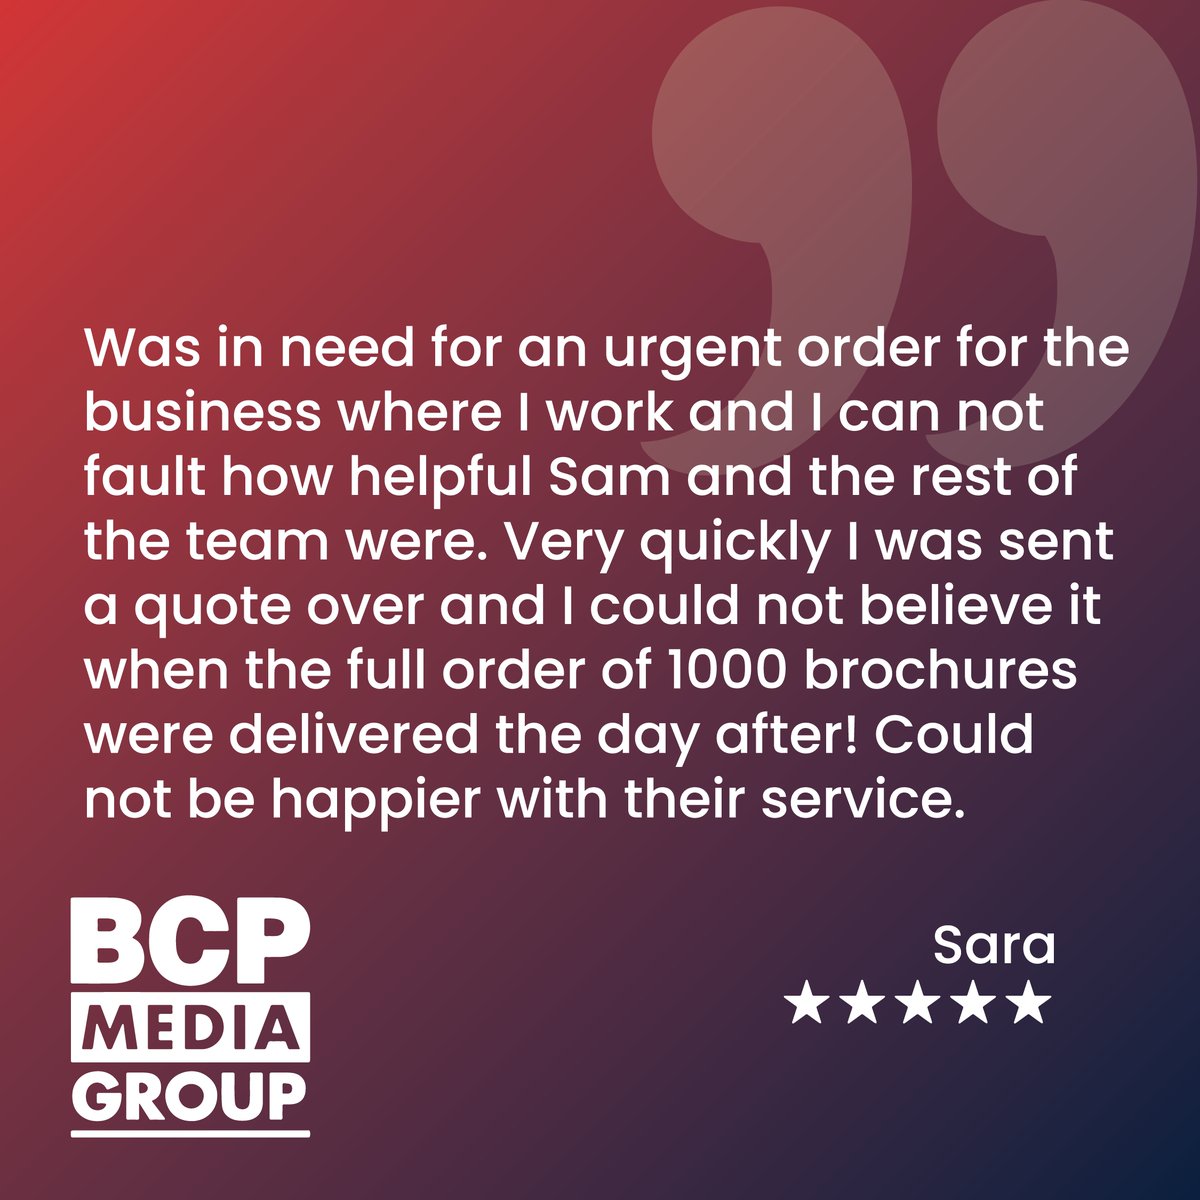 🤩 We absolutely love getting reviews! Seriously, they're like little treasures for us. 

☎️ 01202 023 662
💬 07827 691 832 (WhatsApp)
📨 marketing@bcp.co.uk

 #ImprovingTogether #ShareYourExperience #ReviewUs #FeedbackFriday